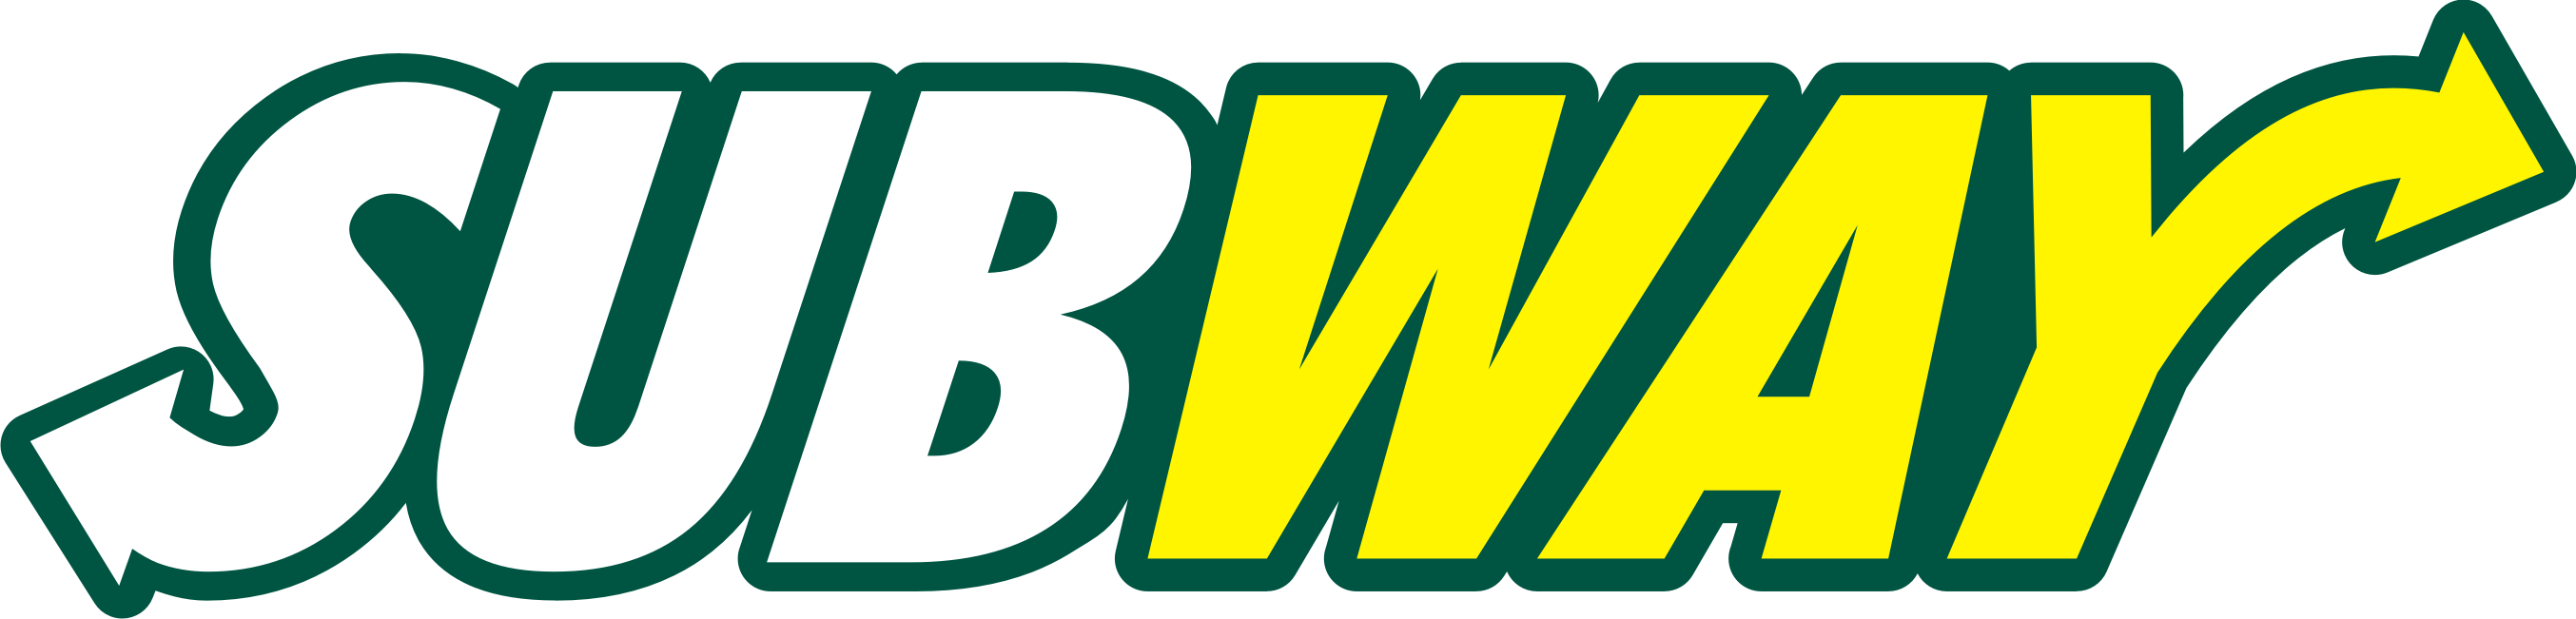 subway logo vector pictures png logo #4297